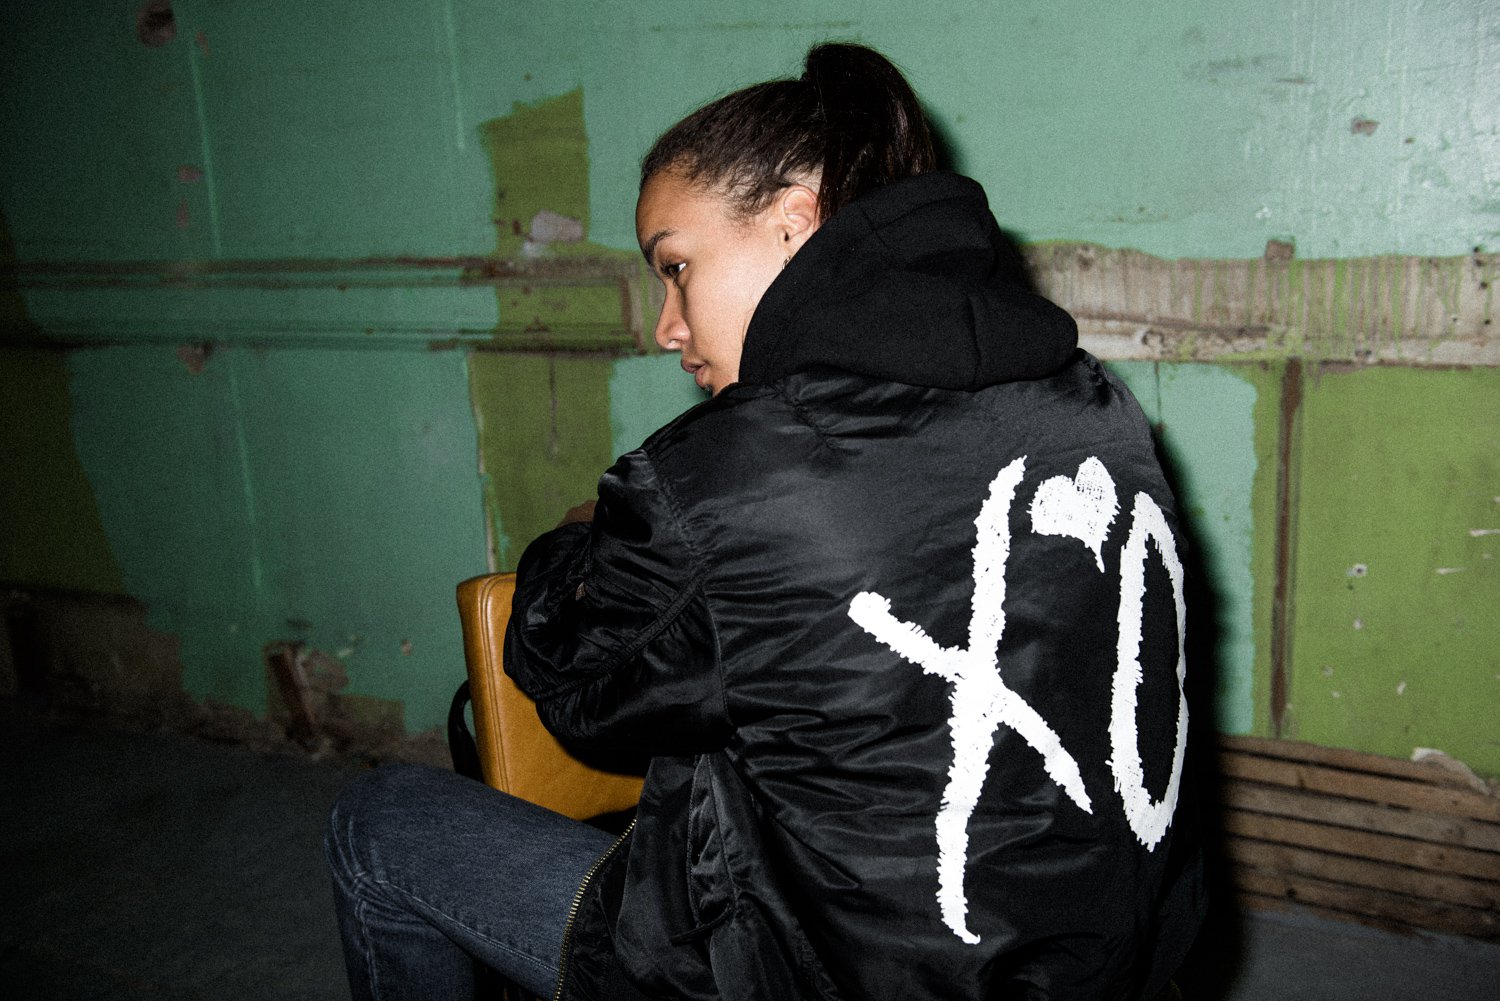 THE WEEKND OVERSIZED HOODIE – Checkmate Atelier - Official Online Store